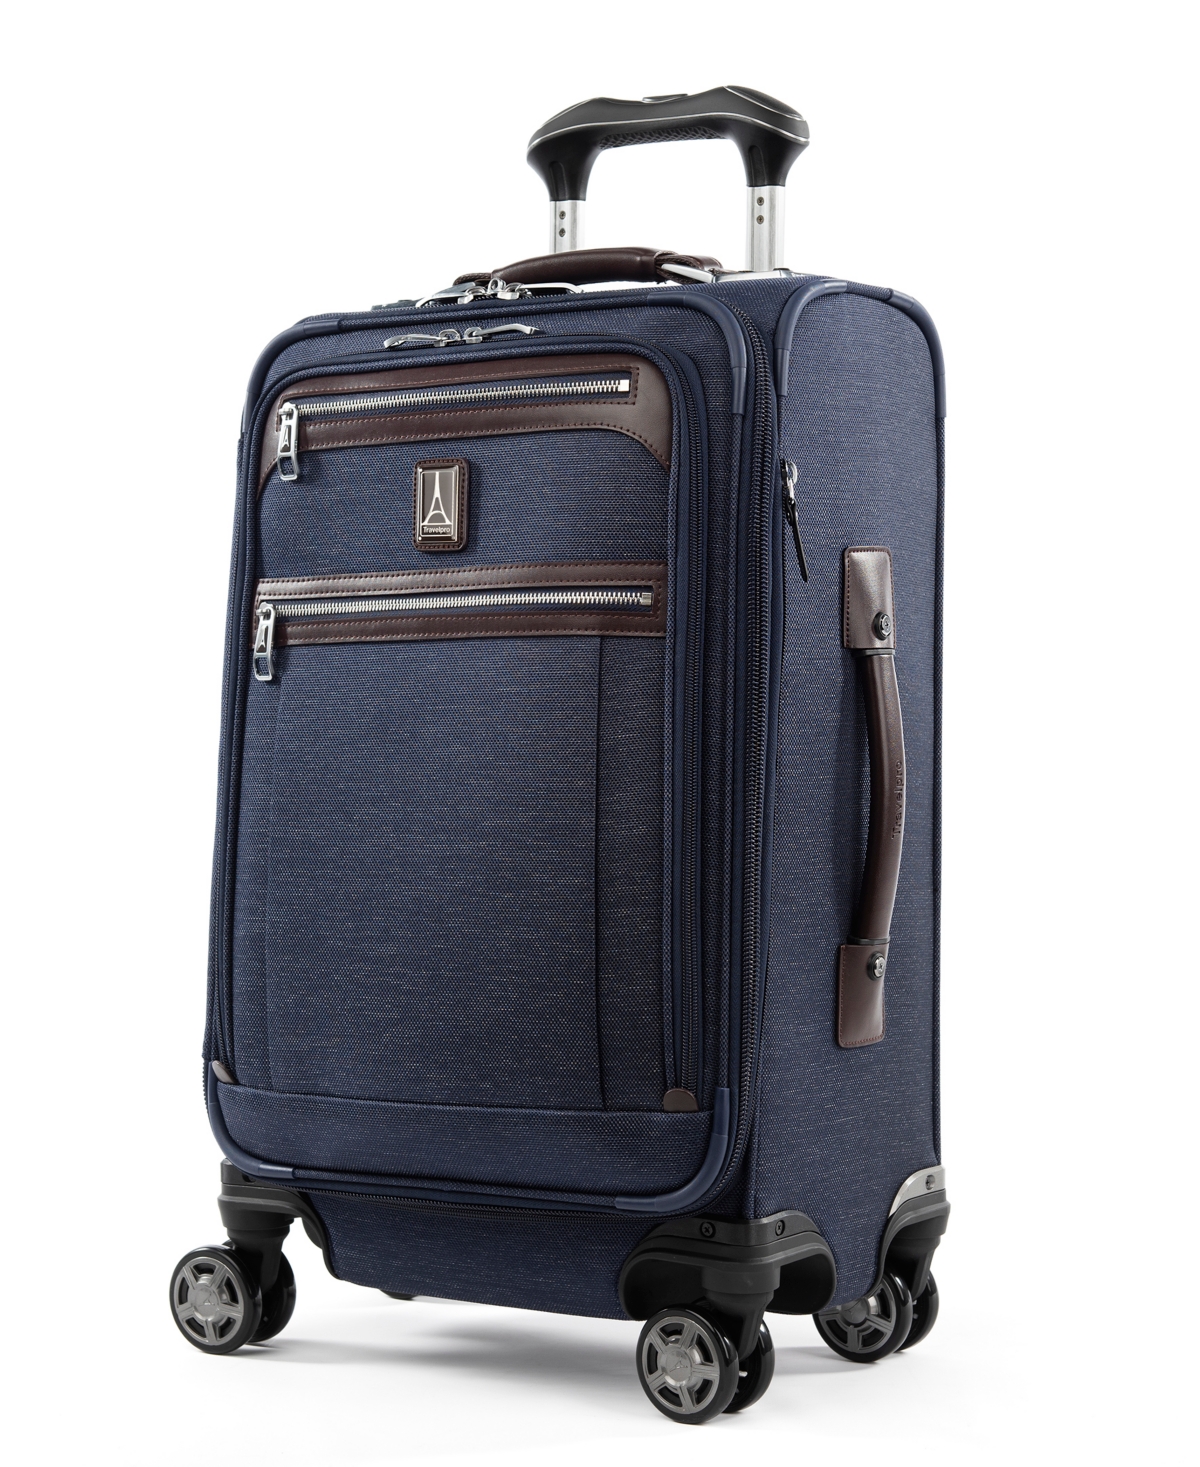 Platinum Elite Limited Edition 21" Softside Carry-On Luggage - Limited Edition True Navy